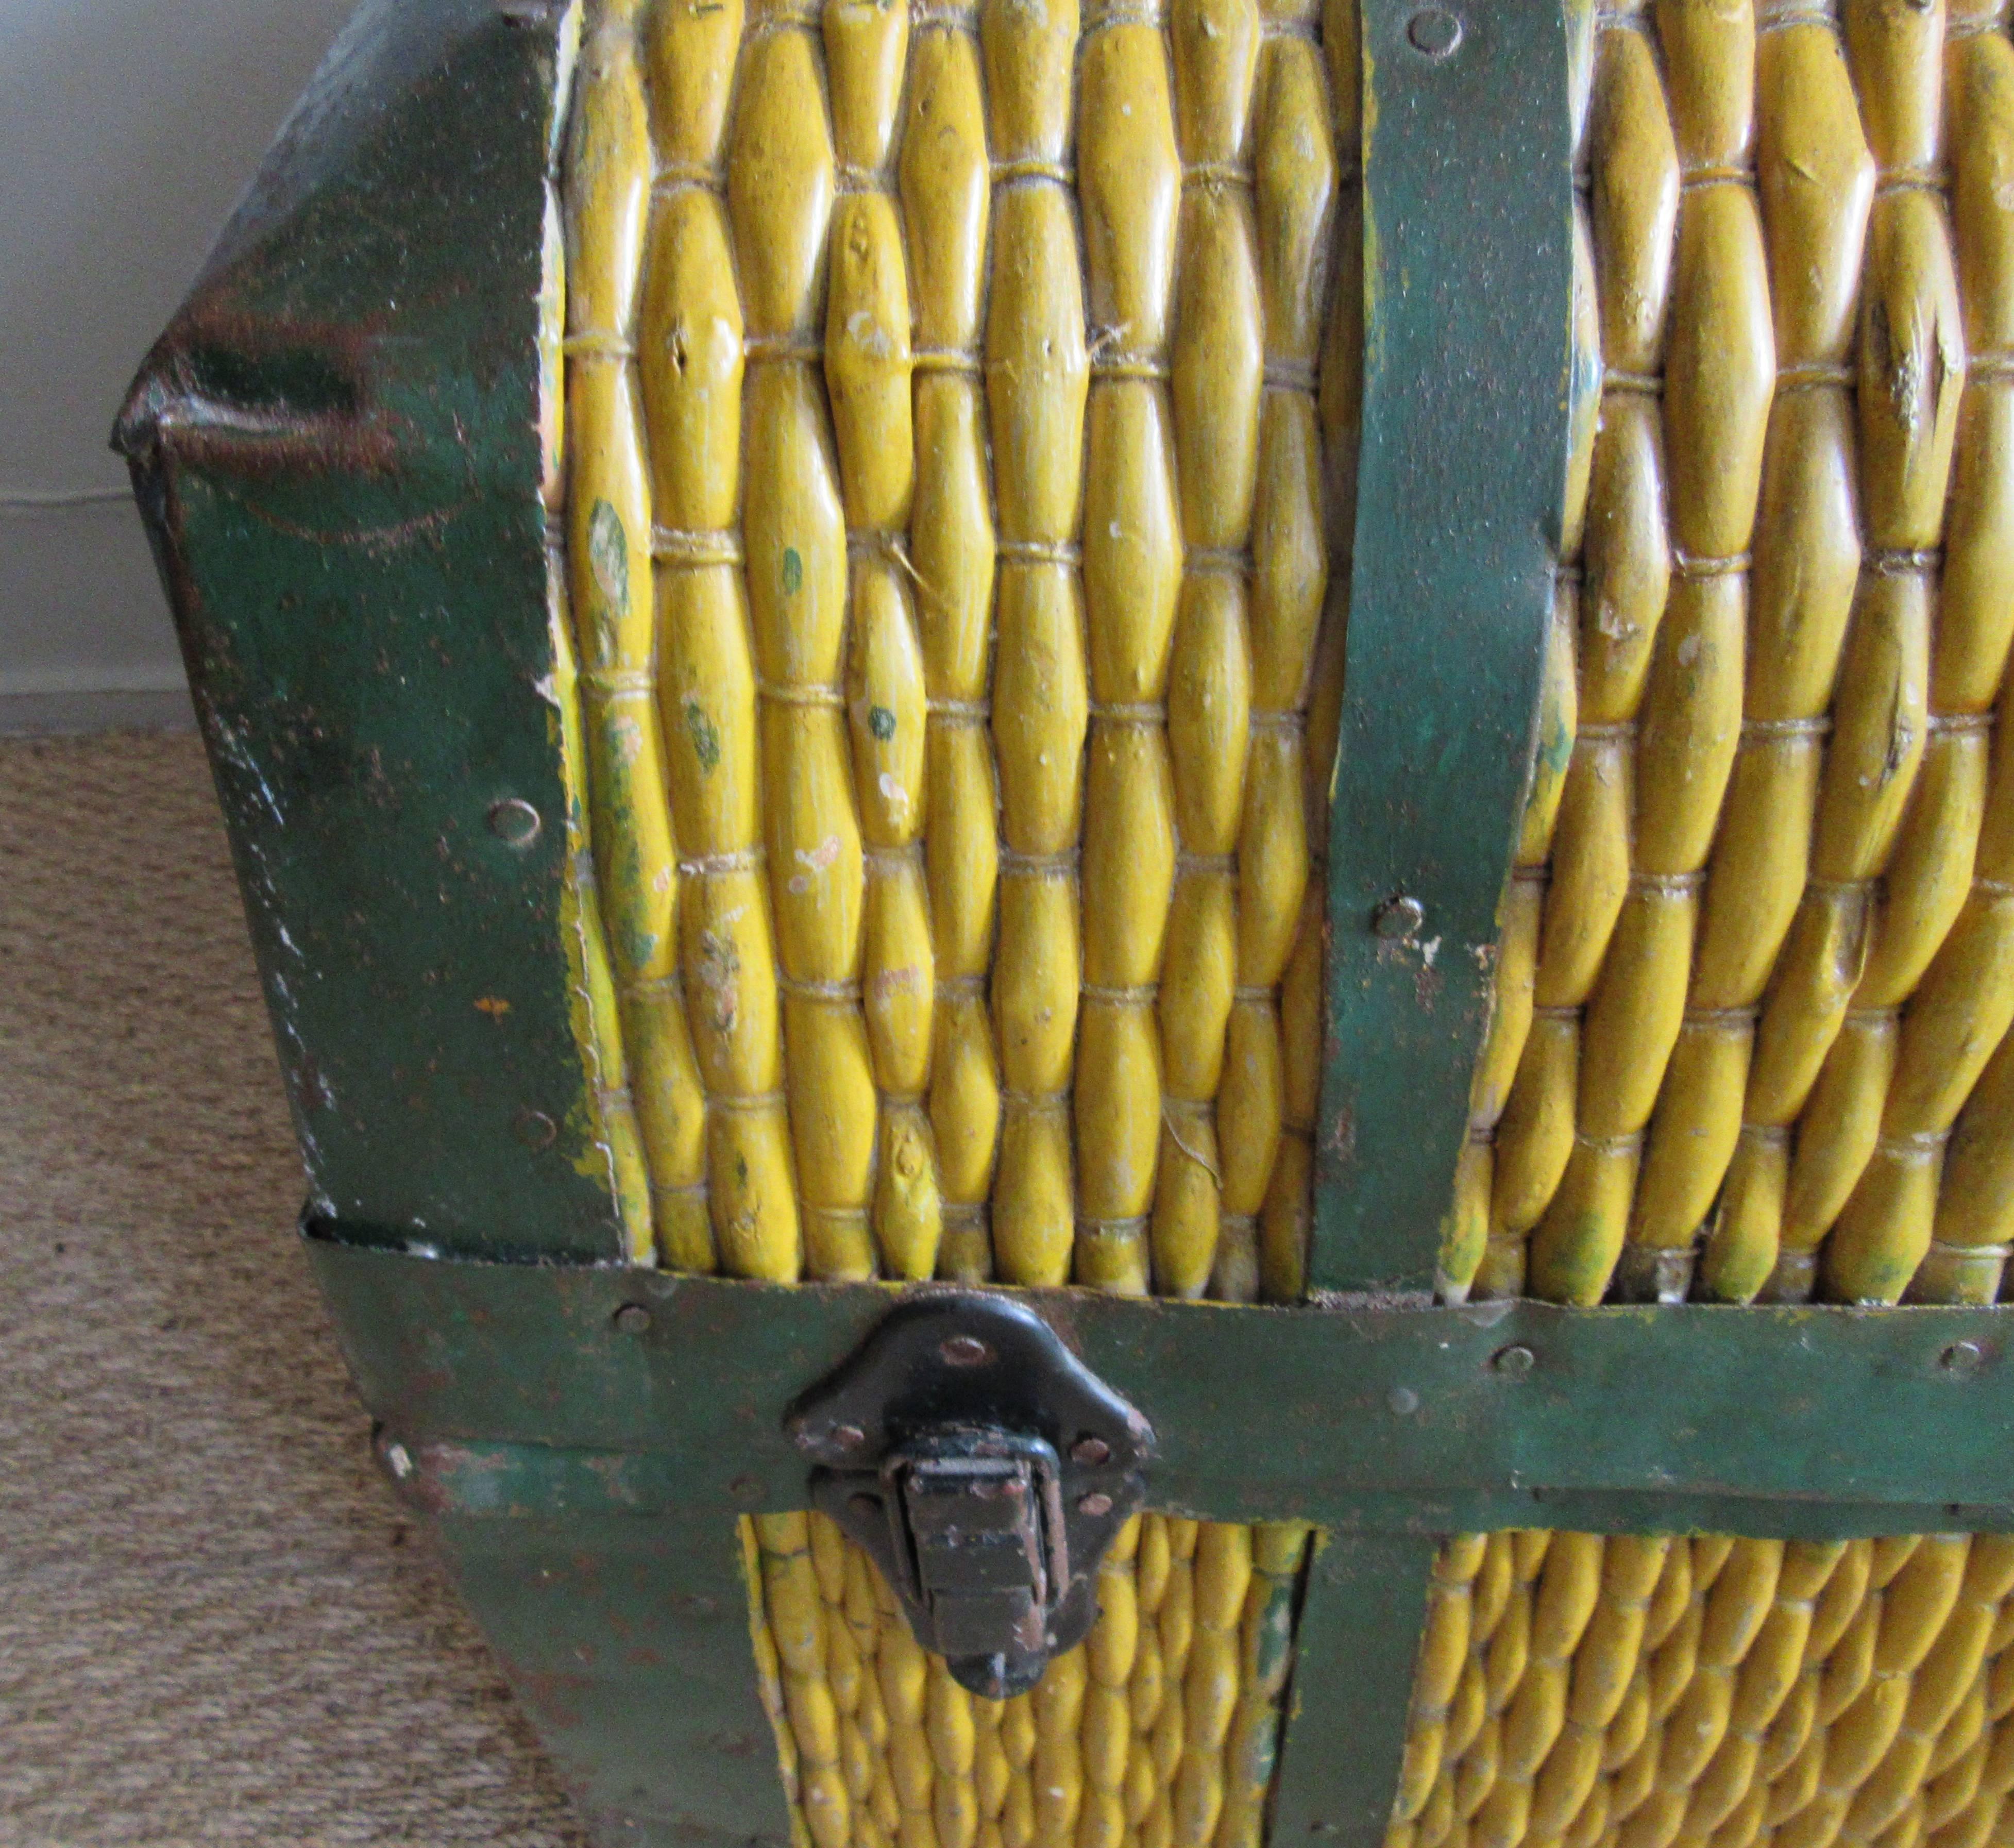 Vibrant saffron yellow rattan trunk with old fashioned curved top accented with green metal fittings. The woven rattan is stretched over a sturdy and hard wooden frame. A stunning accessory for a rustic interior.